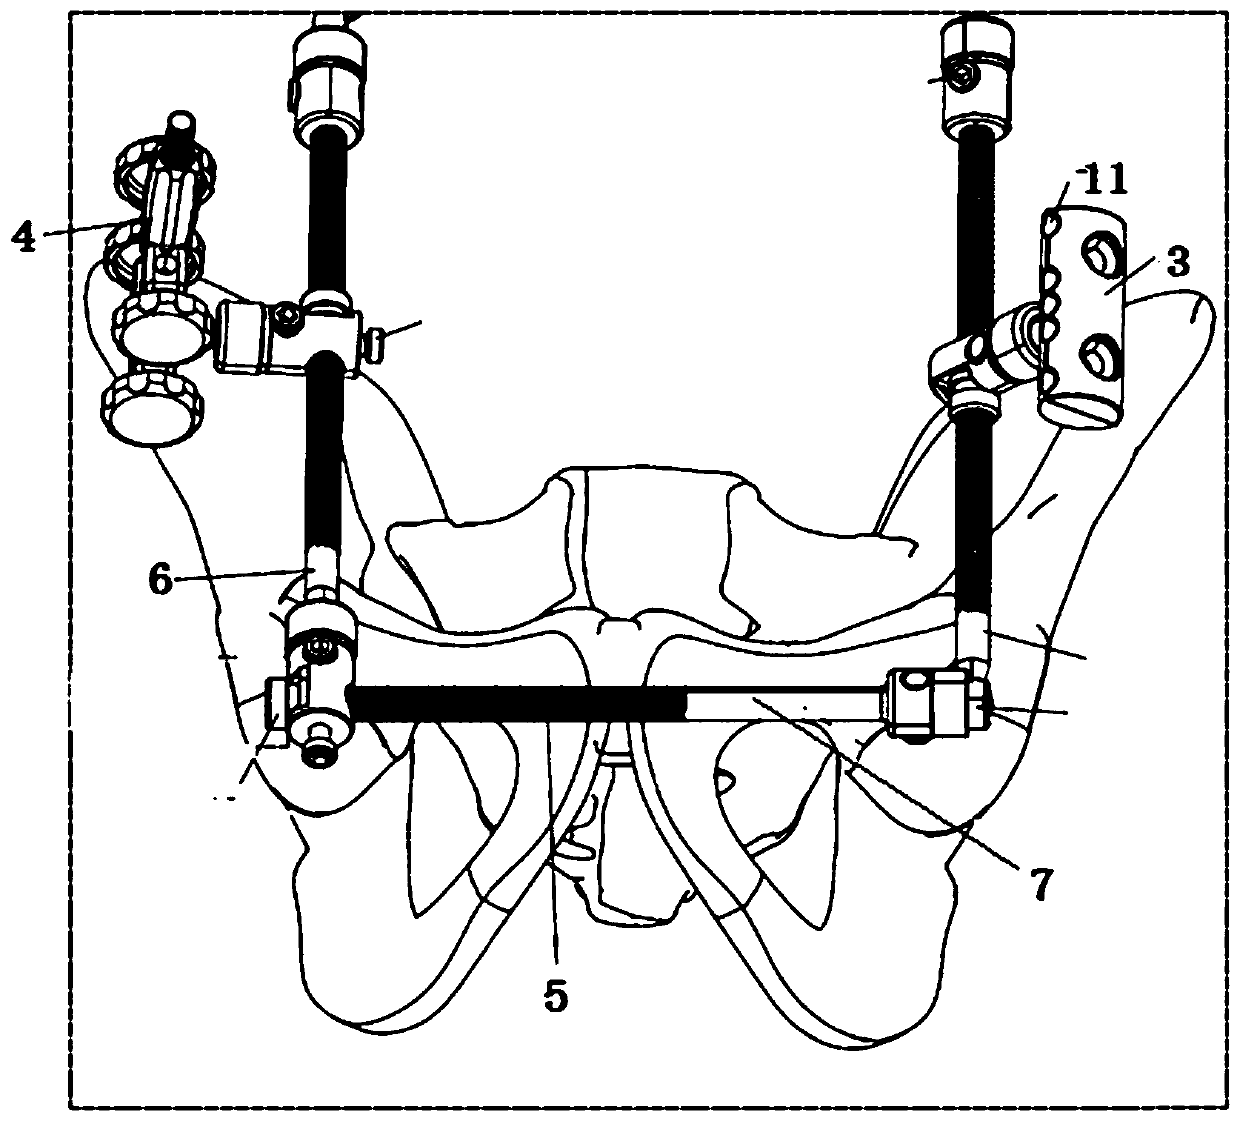 Integral external fixator for anterior and posterior pelvic rings